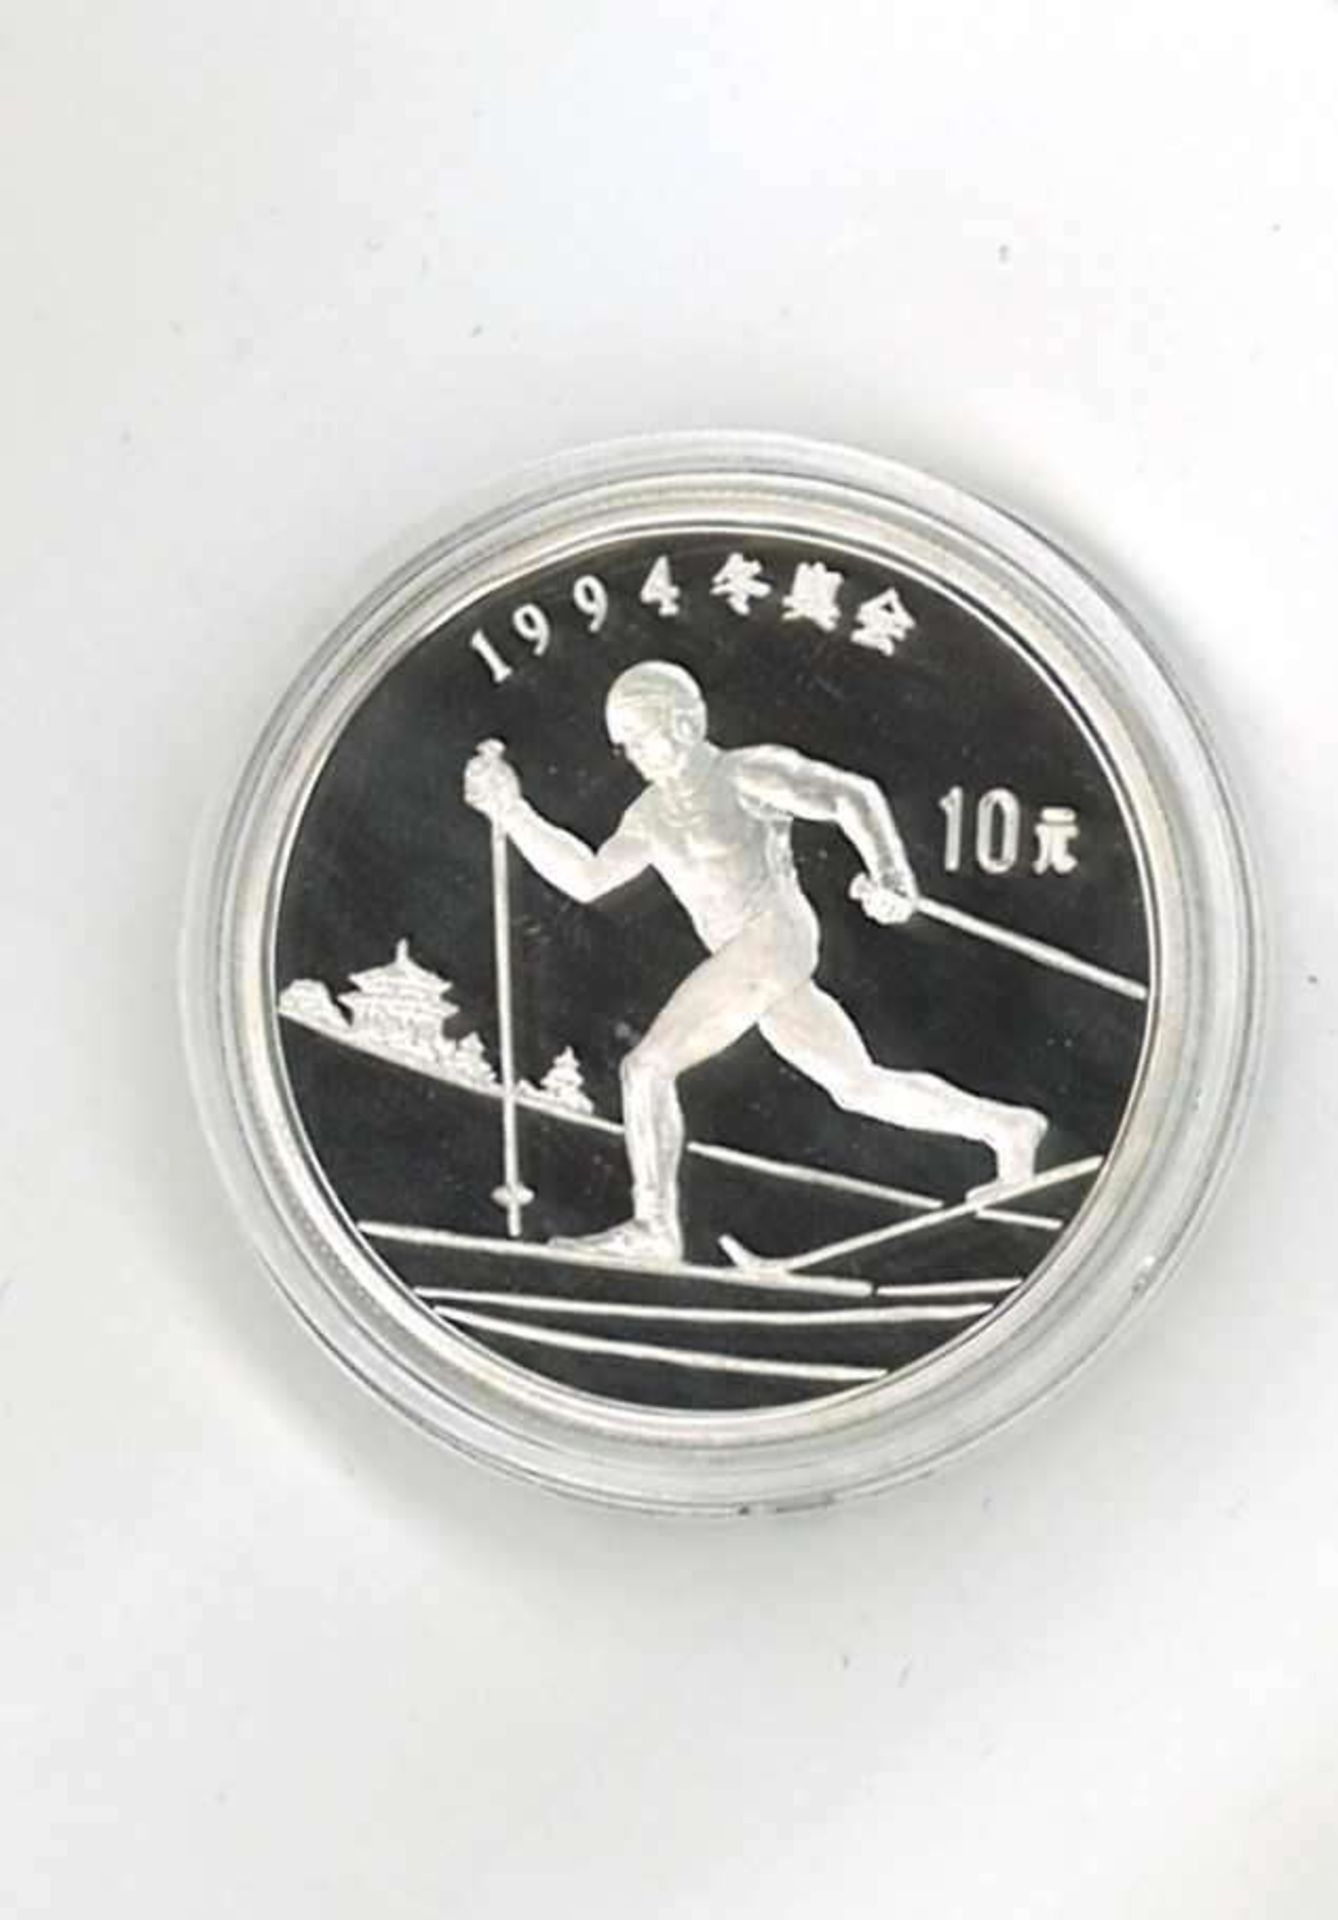 Olympische Spiele China, 10 Yuan, 925/1000 Silber. Langläufer. Mit Zertifikat.Olympic Games China, - Image 2 of 2